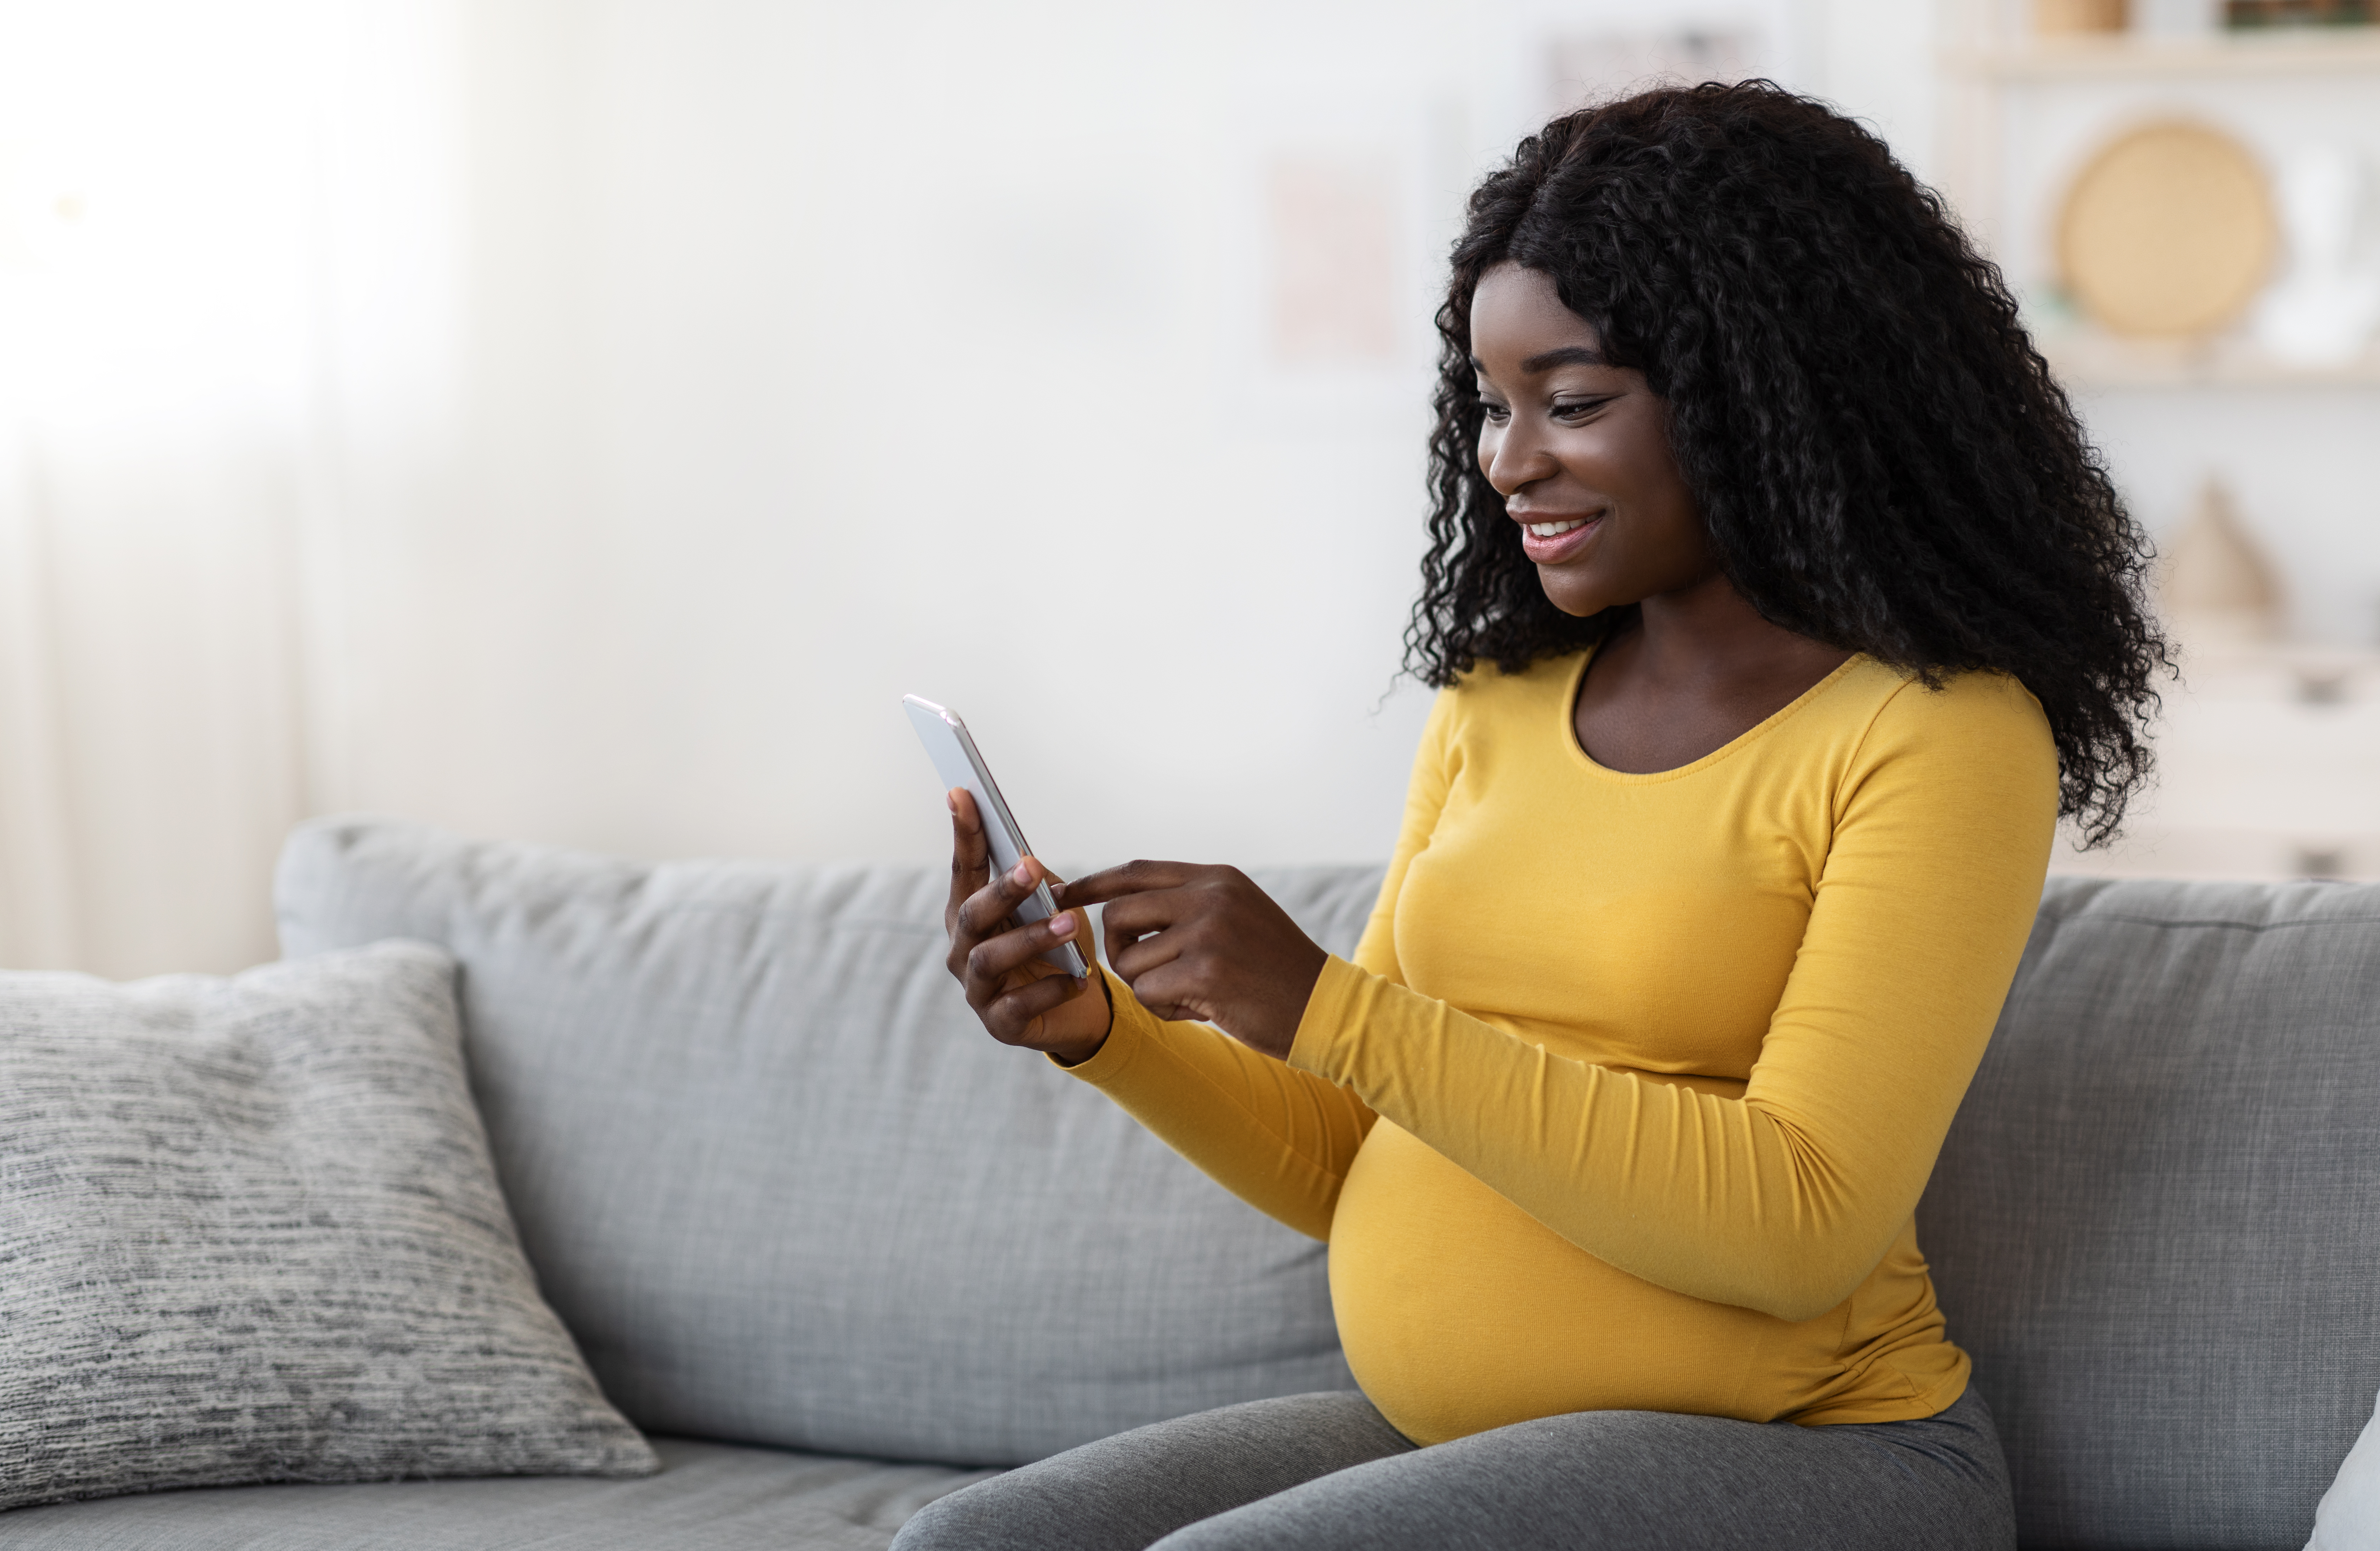 Expectant mom smiles while looking at her smartphone.